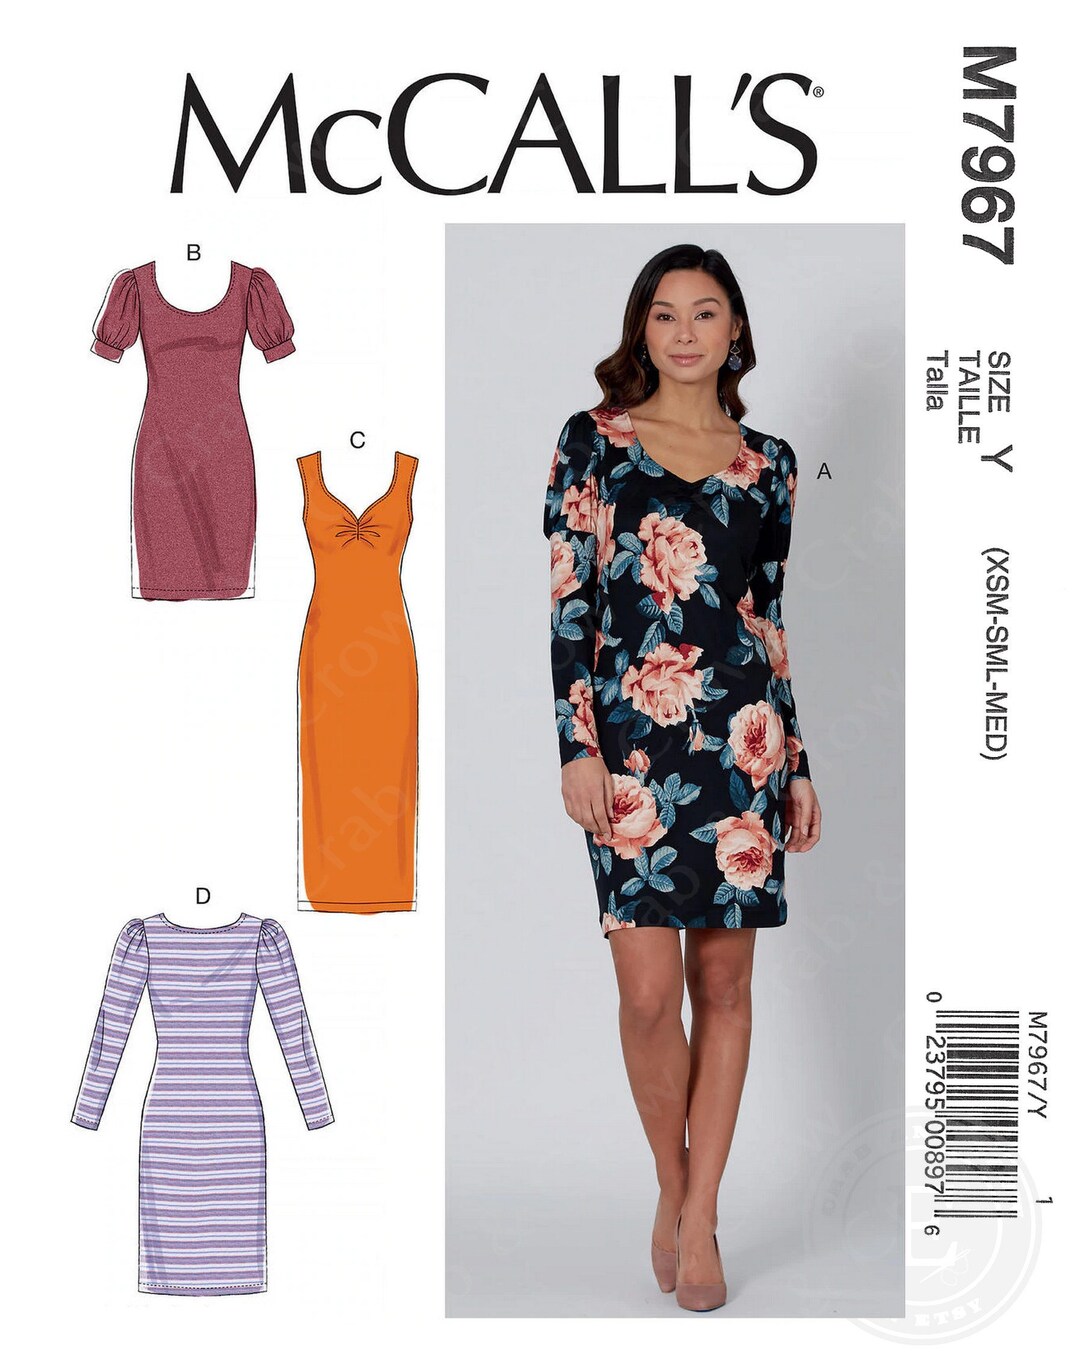 Mccalls M7967 Sewing Pattern for Misses Very Easy Knit Dress With ...